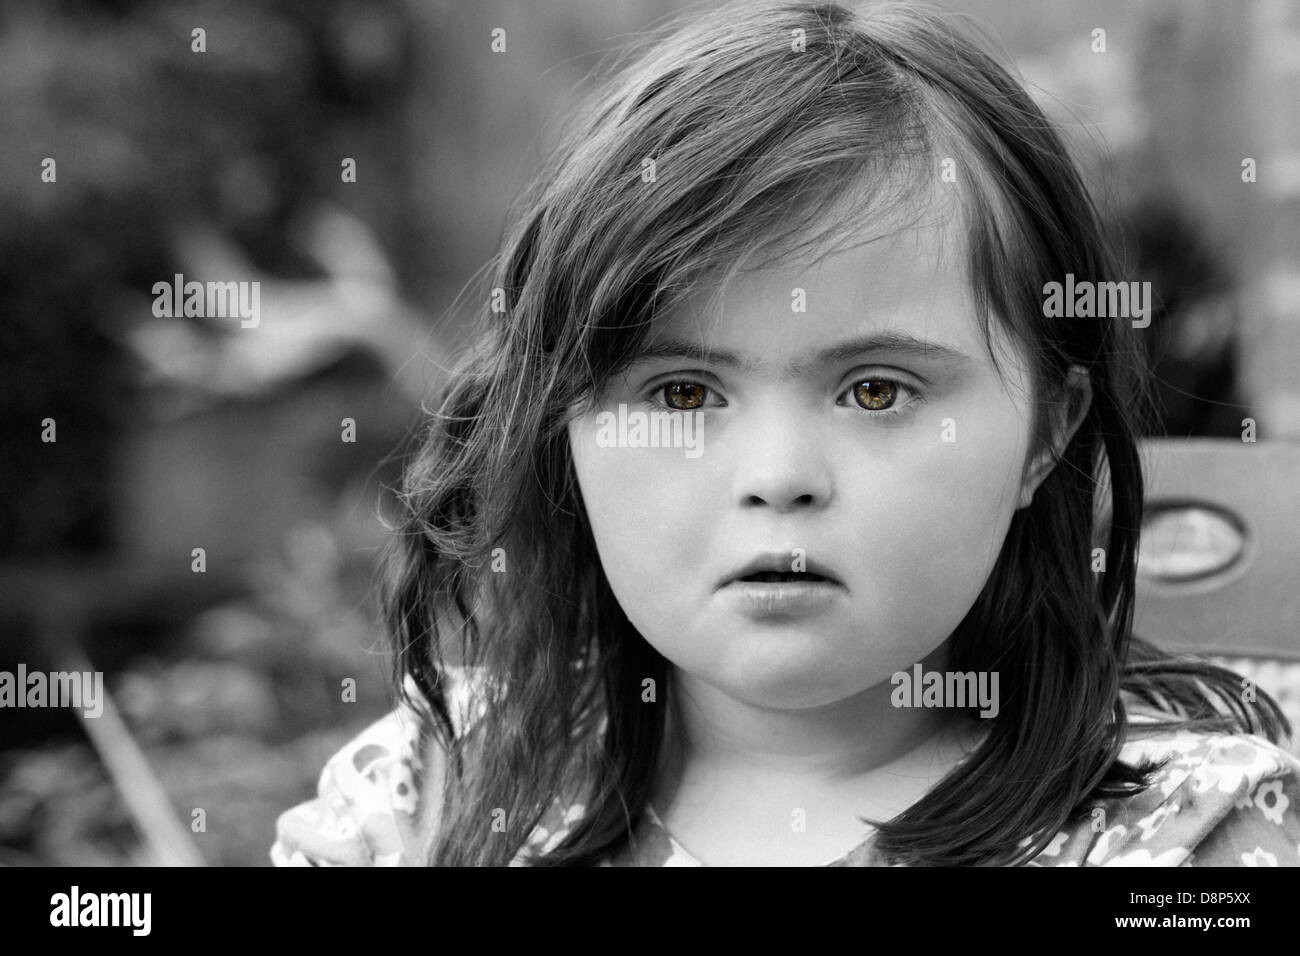 Young Girl with Downs Syndrome. Stock Photo